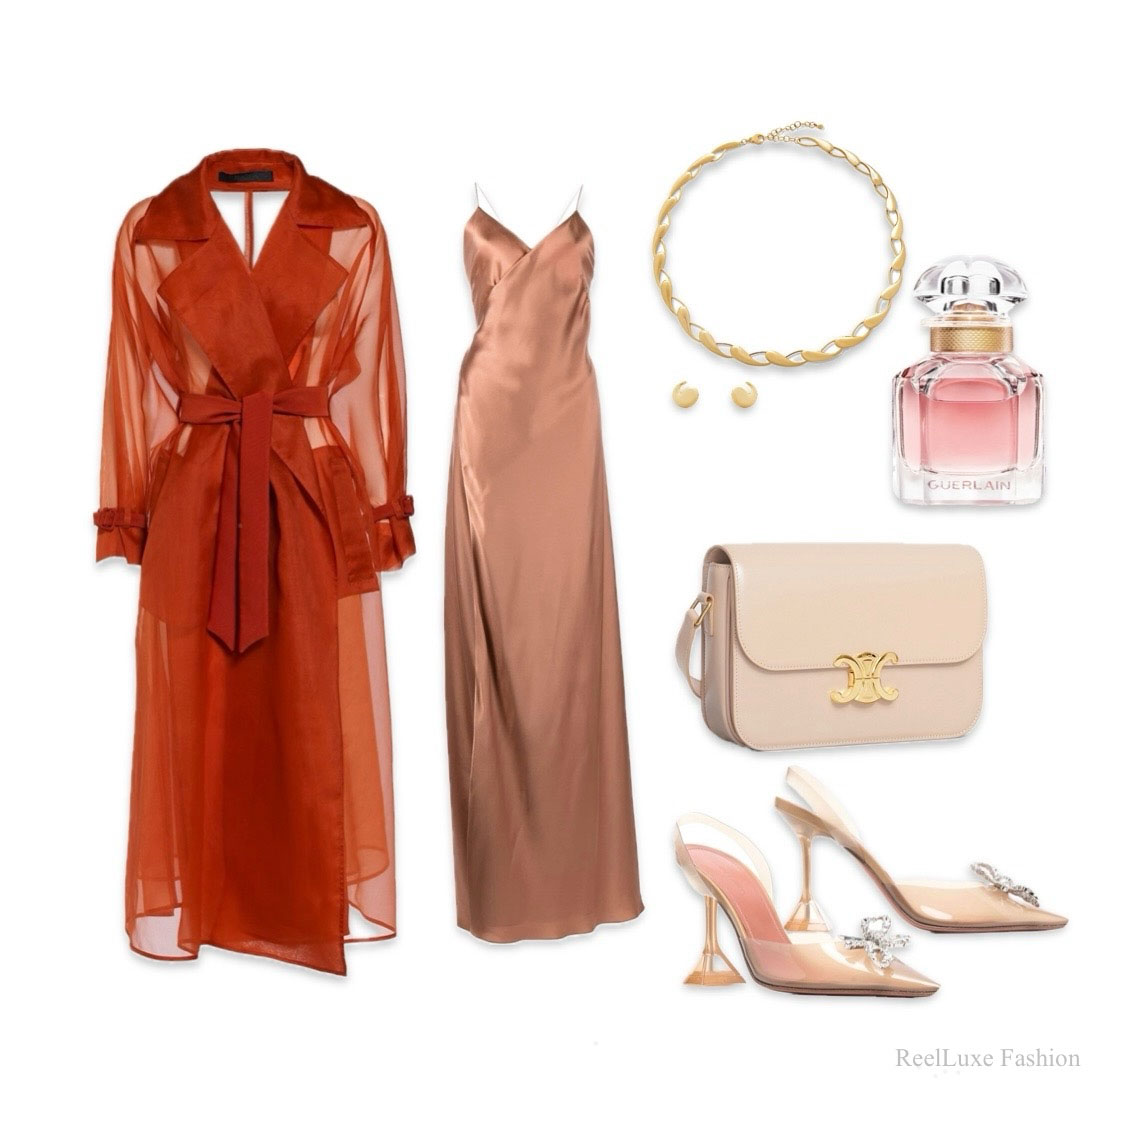 Silk Evening Vibe for a Sensual Look with an Organza Trench Coat by Max Mara